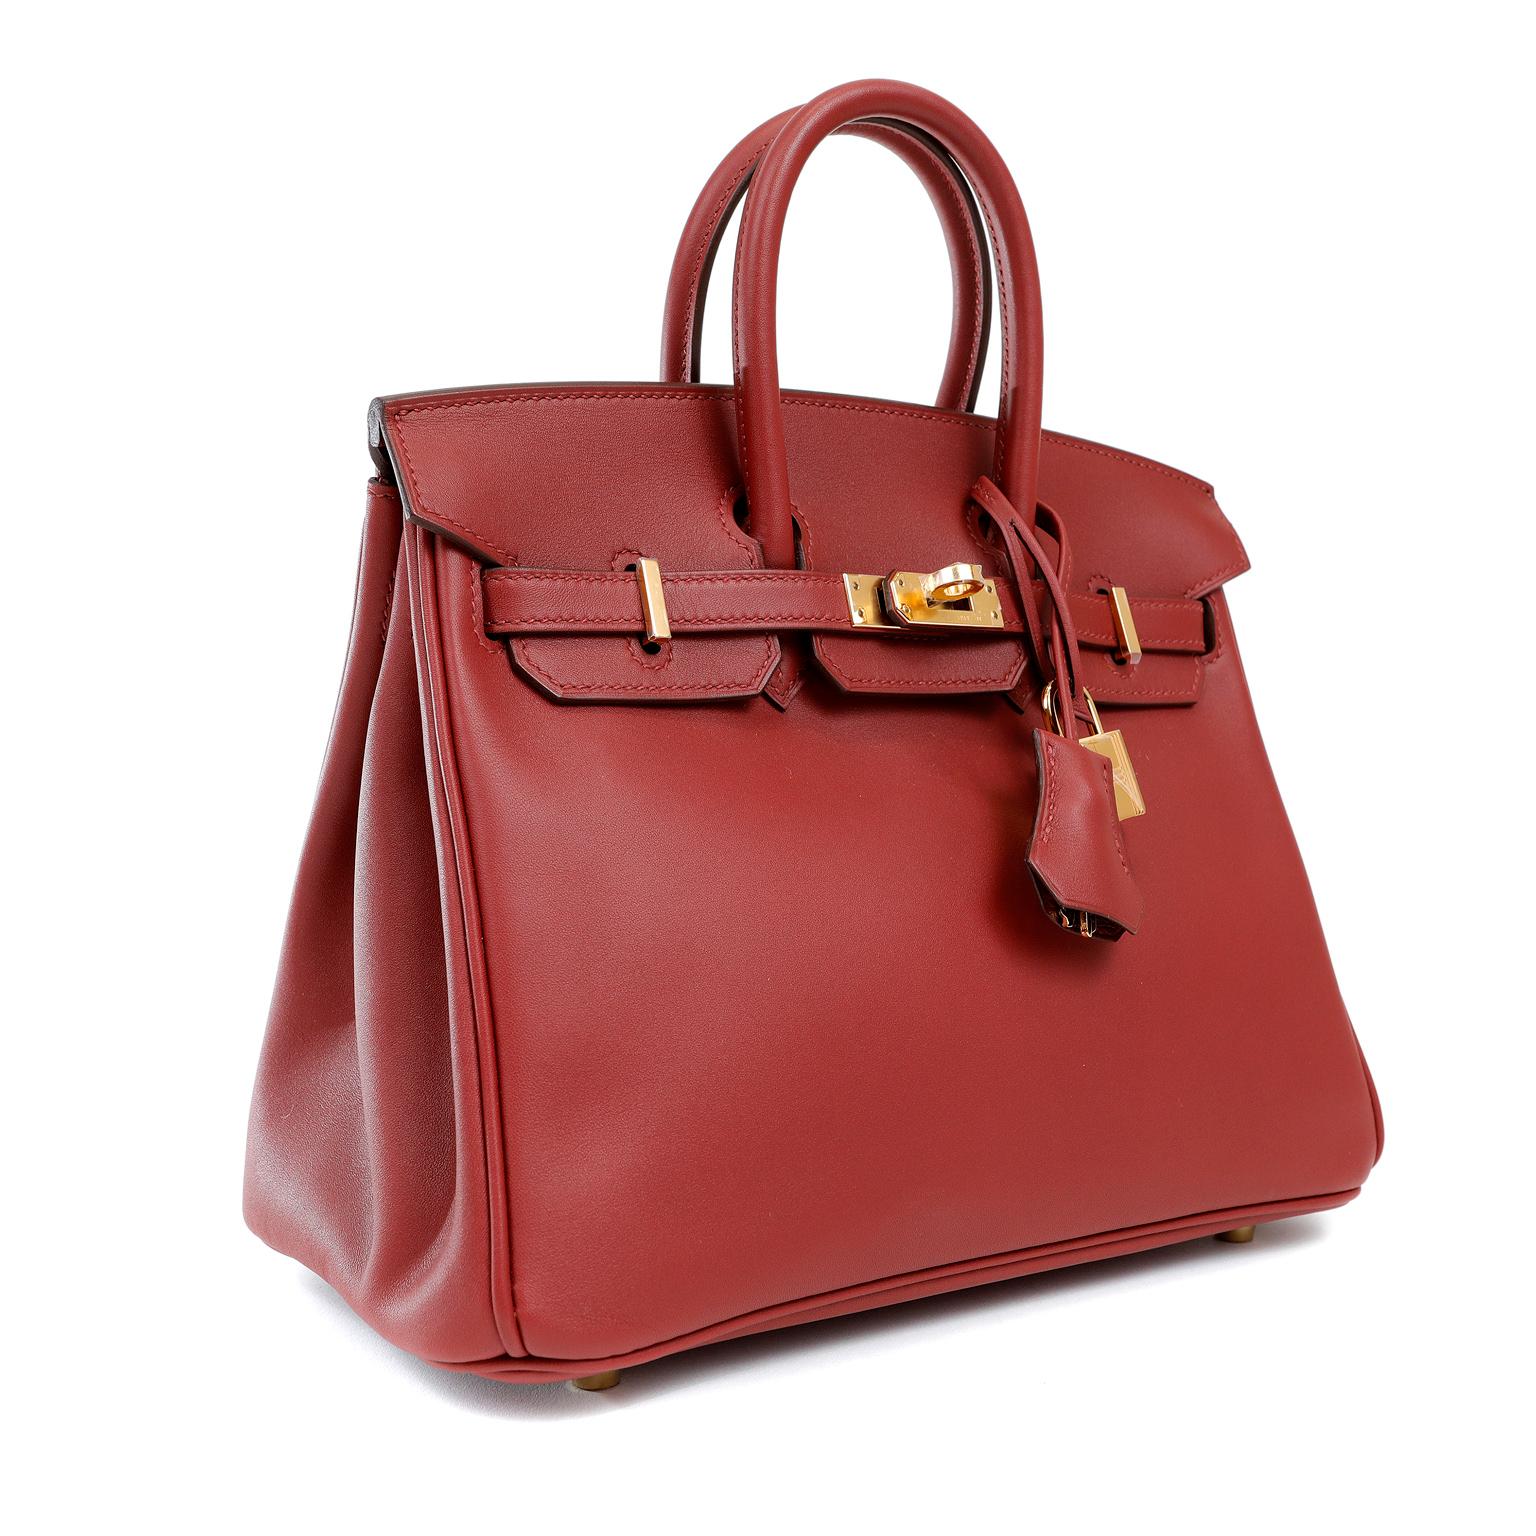 This authentic Hermès Dark Red Swift Leather 25 cm Birkin Bag is in pristine unworn condition with plastic intact on the hardware.  Long waitlists are commonplace for the intensely coveted classic leather Birkin bag.  Each piece is hand crafted by